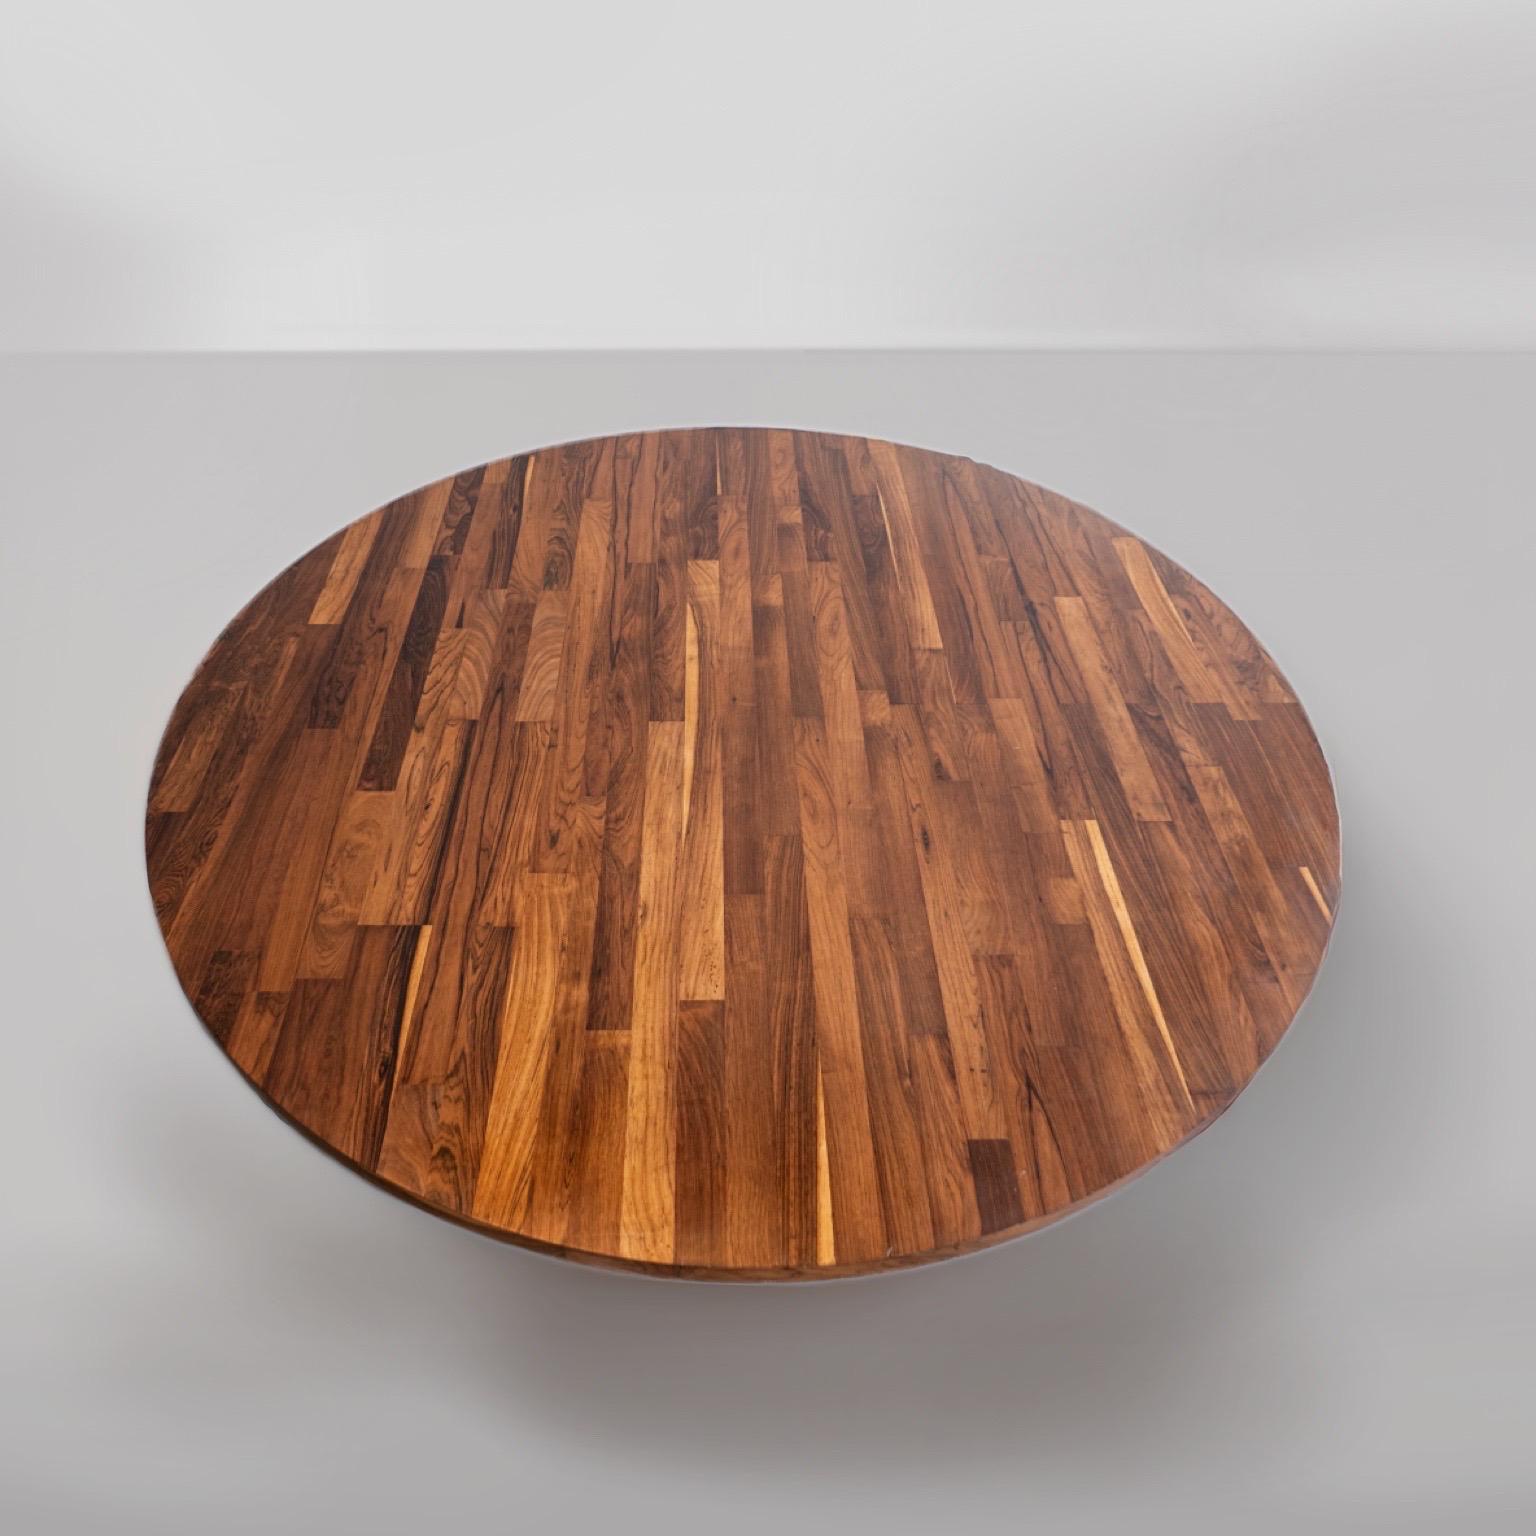 Veneer Mid-Century Modern Round Wooden Leather Dining Table by Jorge Zalszupin, 1960s For Sale